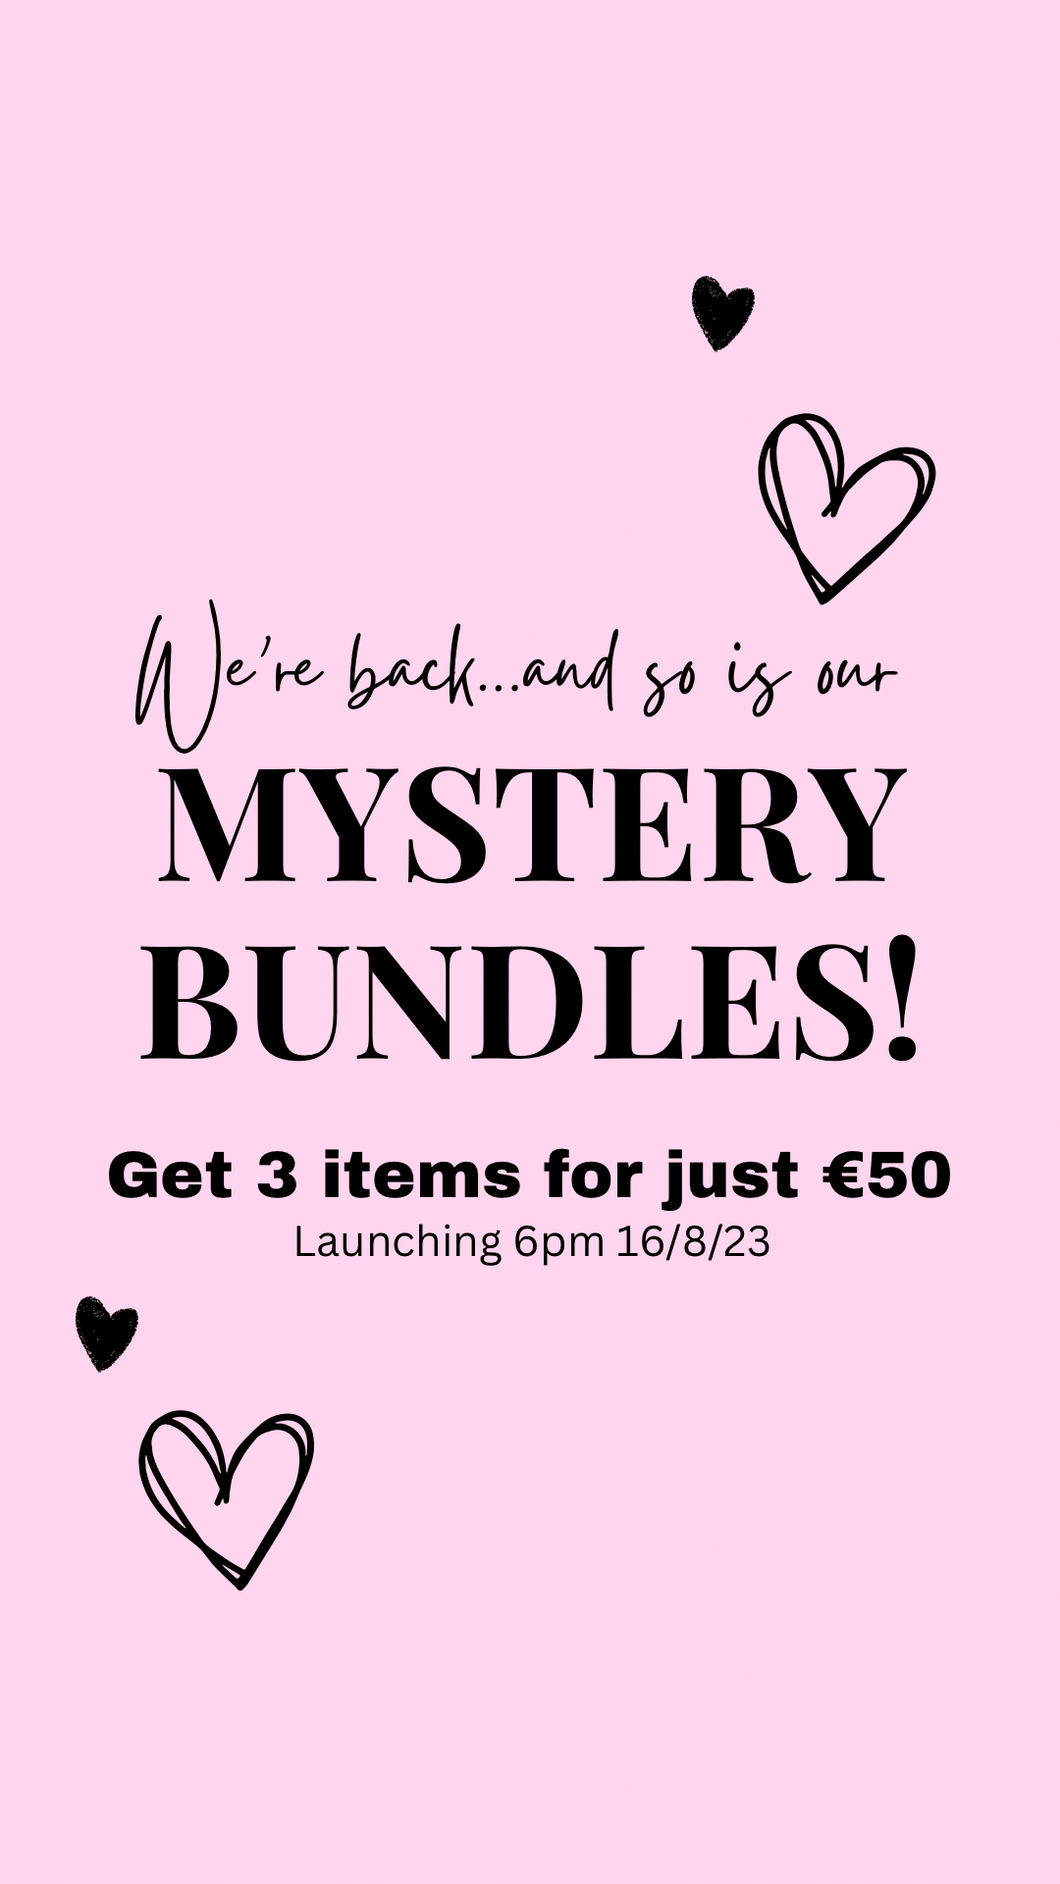 EXCLUSIVE MYSTERY BUNDLES